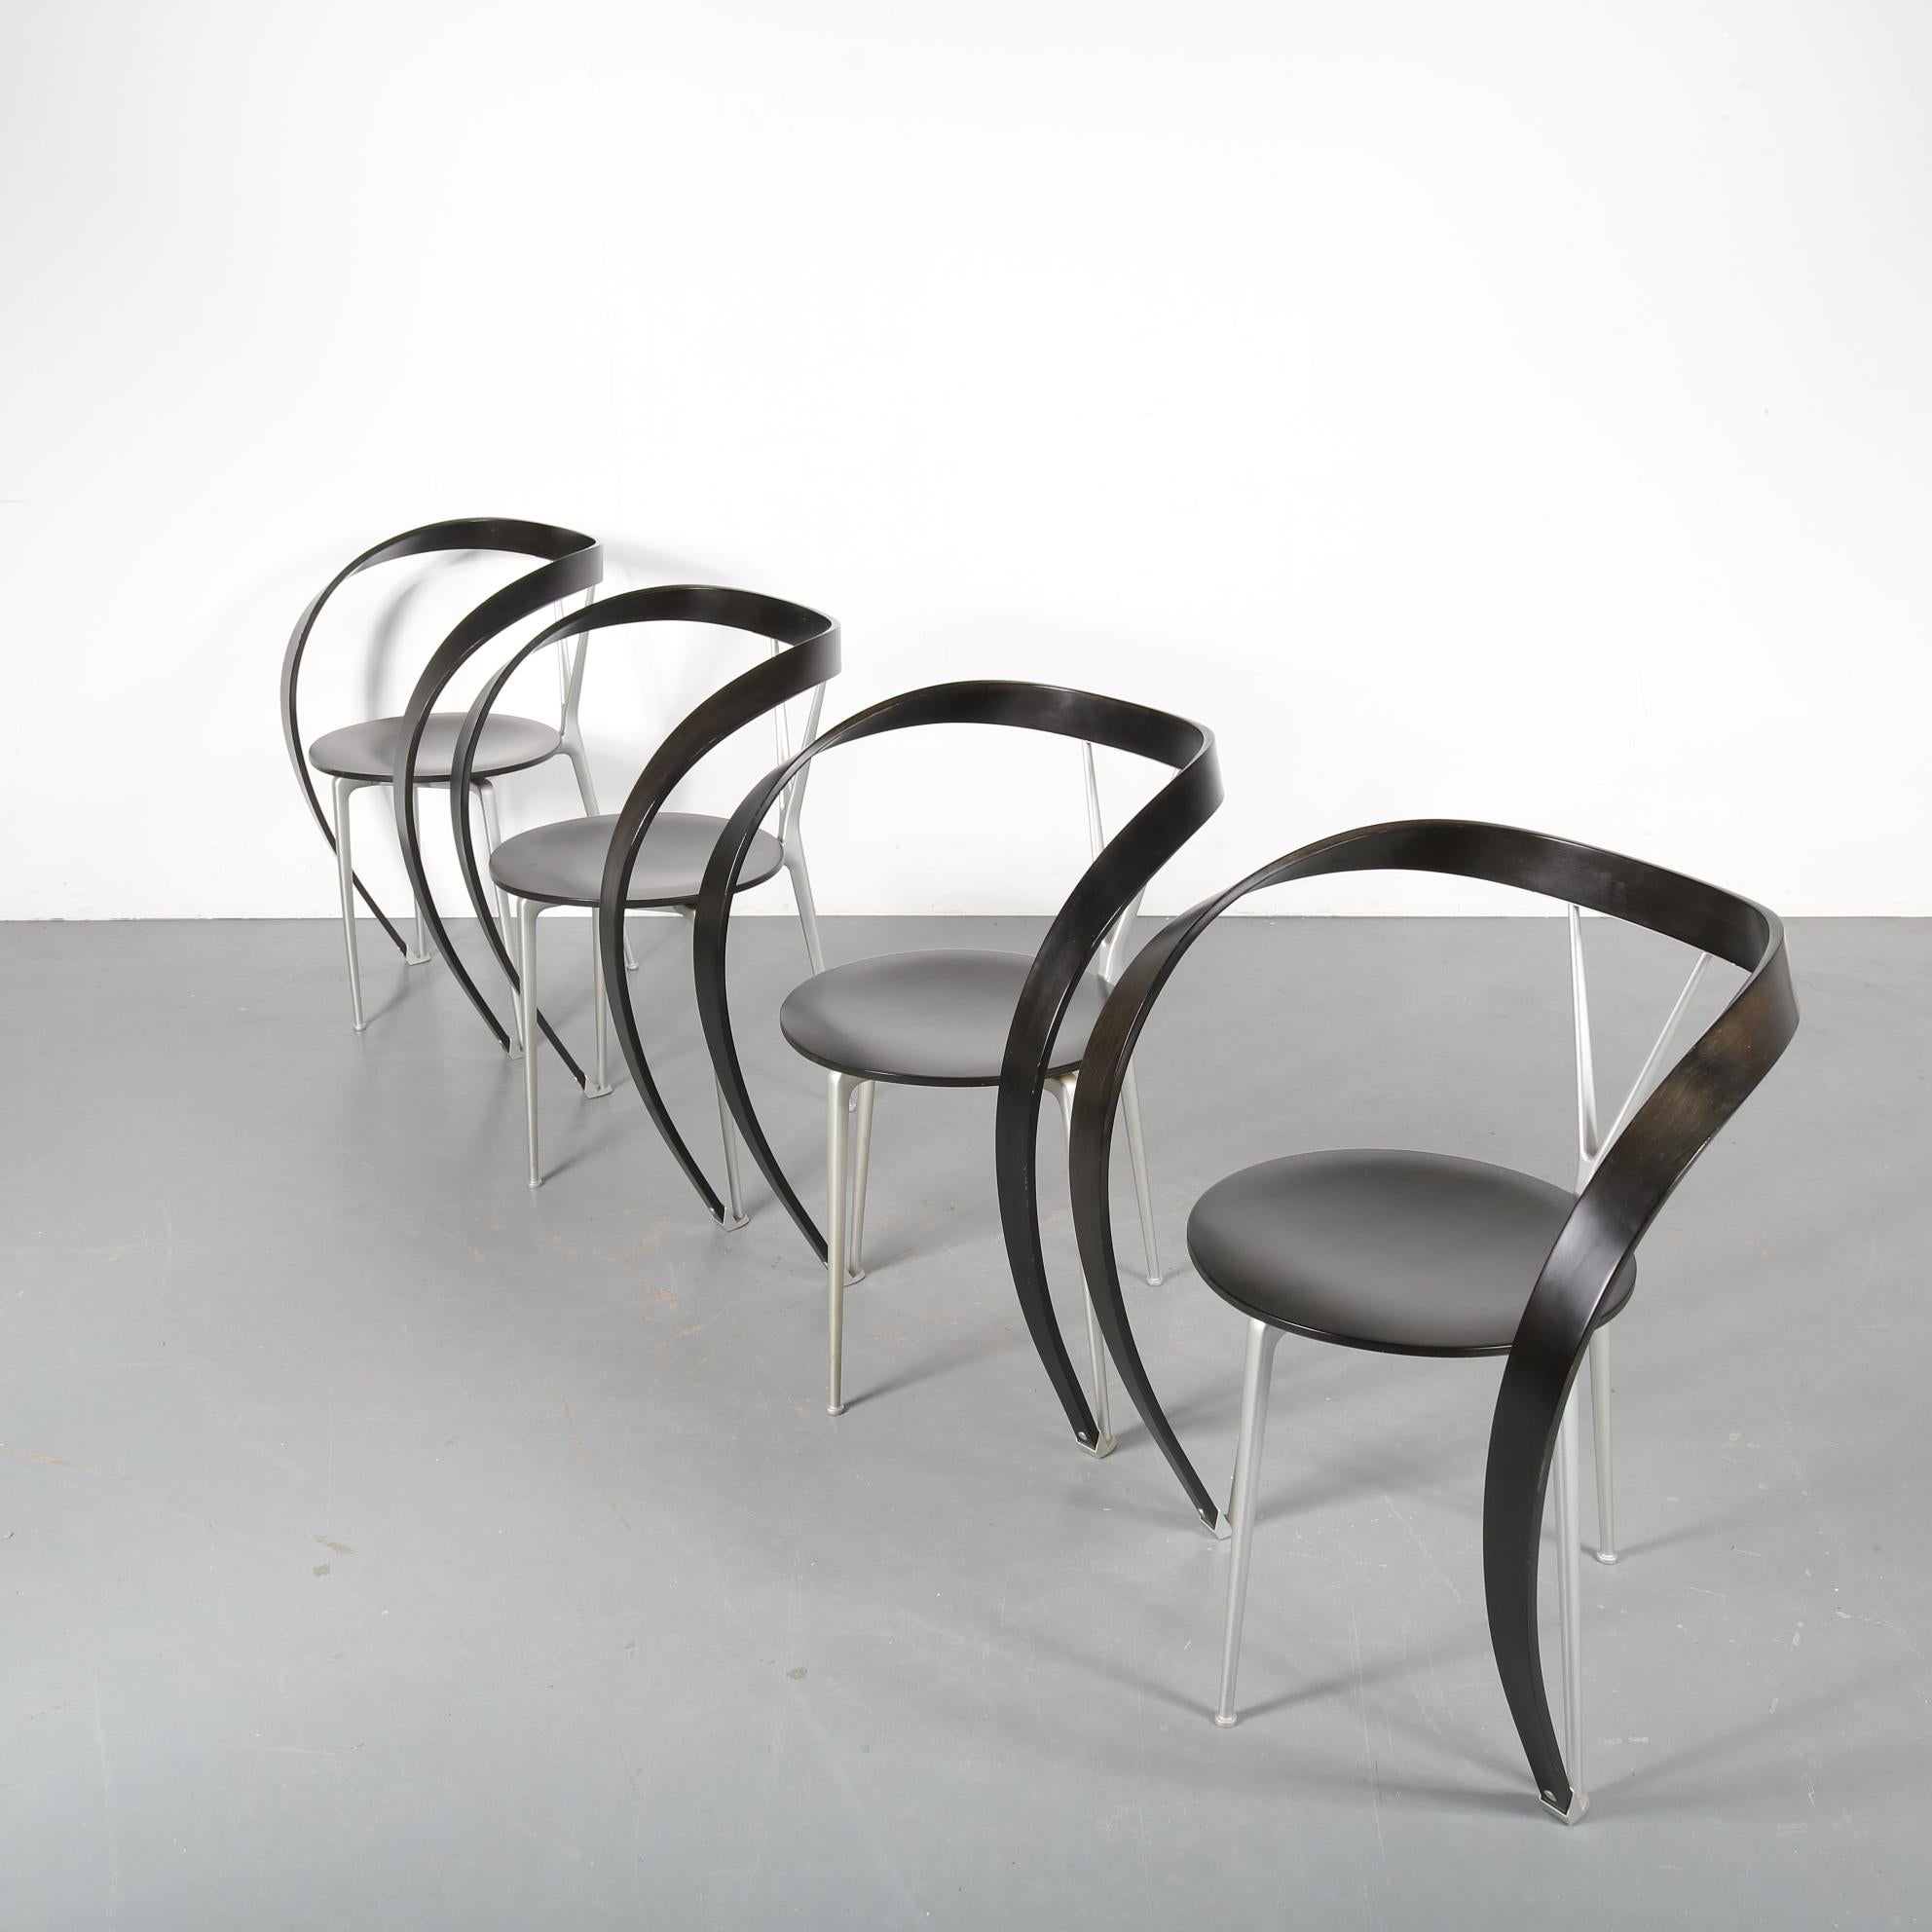 An beautiful set of four luxurious chairs, model “Revers”, designed by Andrea Branzi and manufactured by Cassina in Italy, circa 1990.

The main eye-catching feature of these chairs are the smoothly bent armrests. Each chair has an integrated